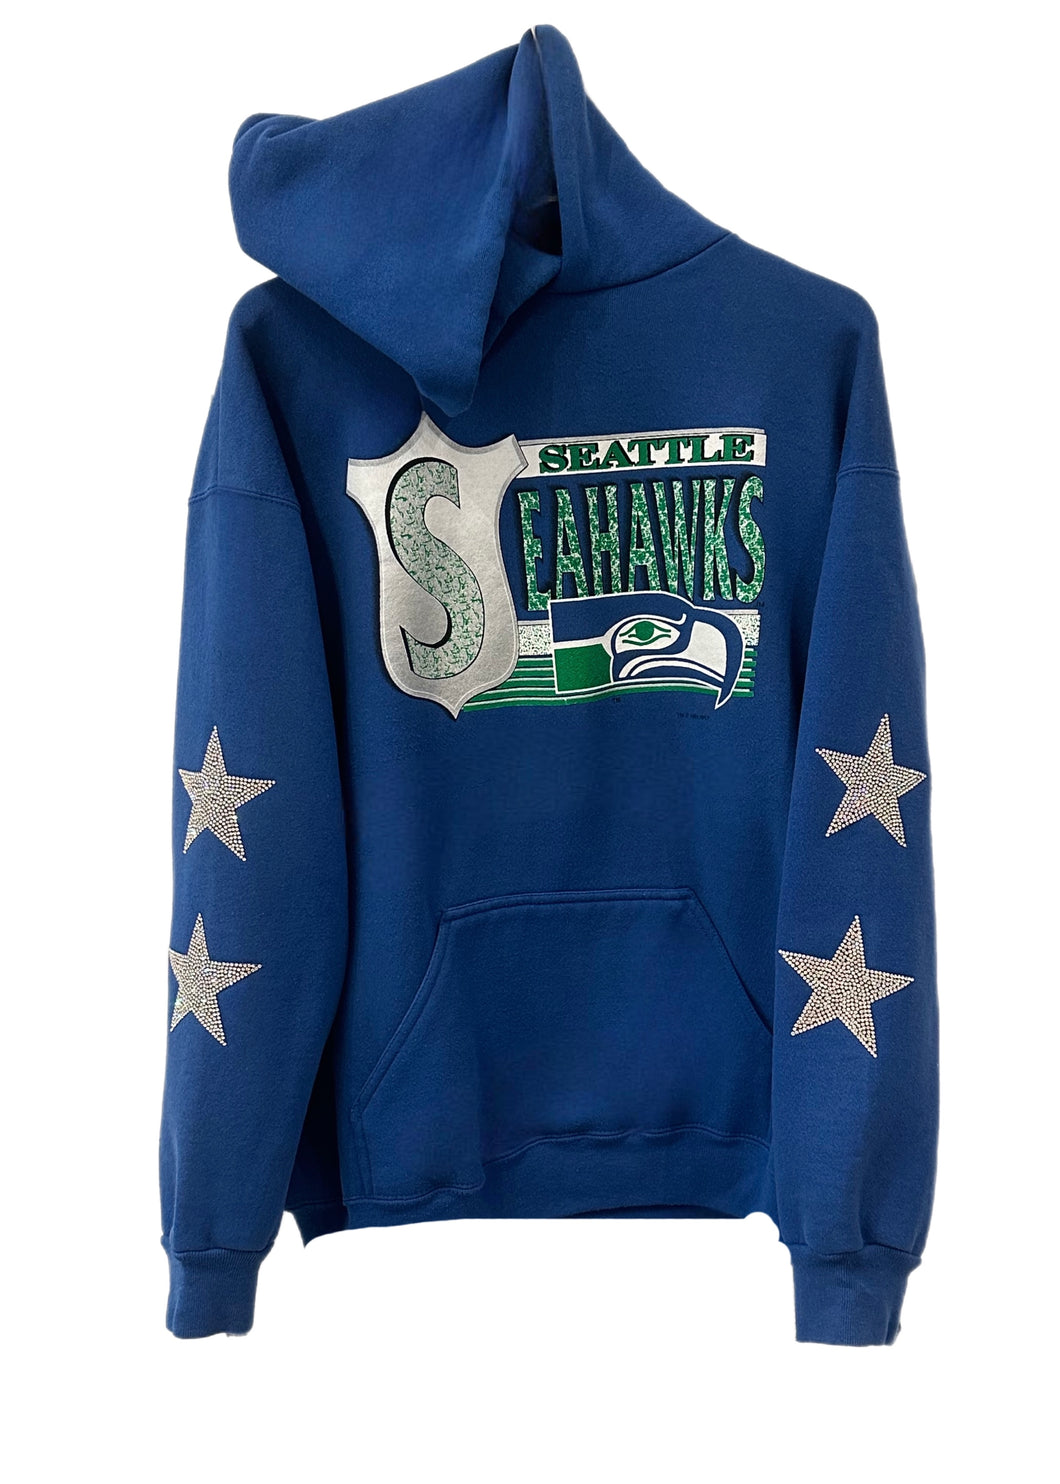 Seattle Seahawks, NFL One of a KIND Vintage Hoodie with Crystal Star Design